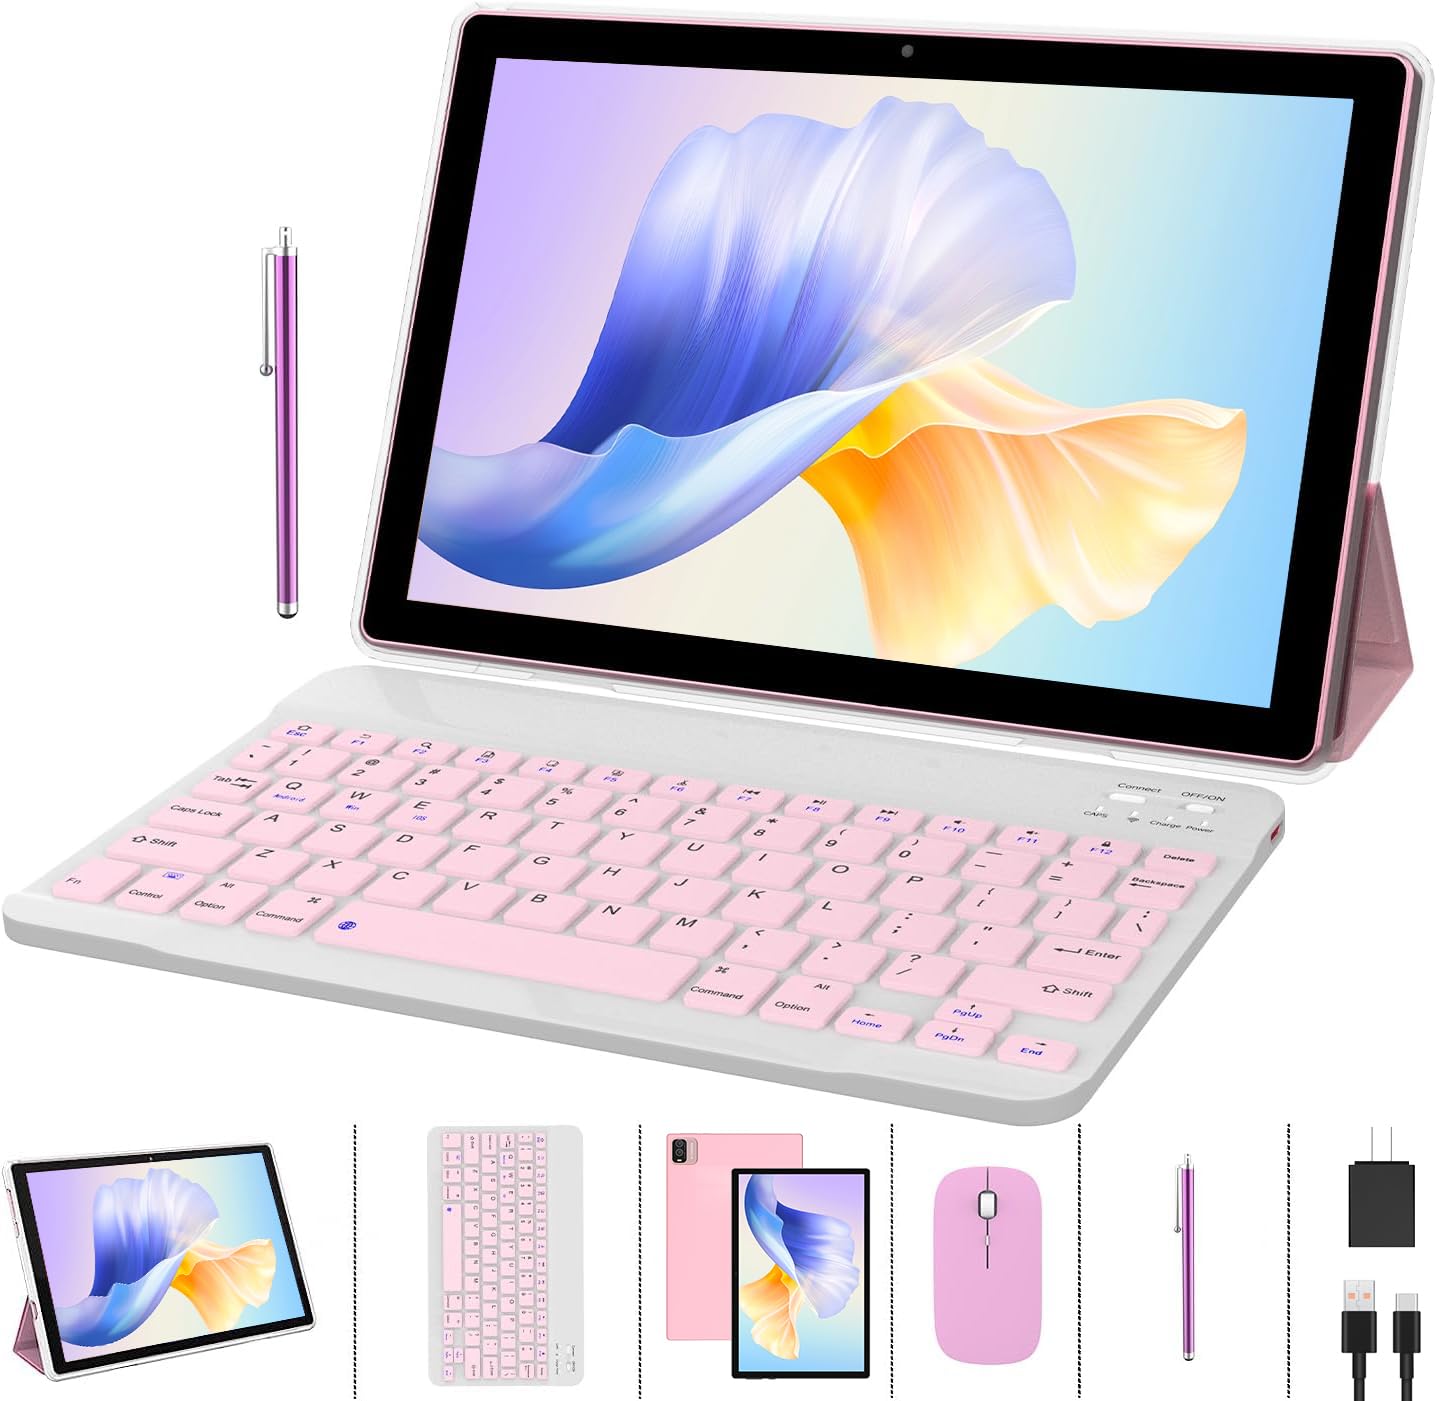 2 in 1 Tablet with Keyboard Case Mouse Stylus Pen Film, 10 inch Tablet Android 11.0 Tablets PC Set, 4GB RAM+64GB ROM Tableta Computer 10.1" IPS Screen 8MP Dual Camera WiFi BT Google Play Tab Pink/Girl